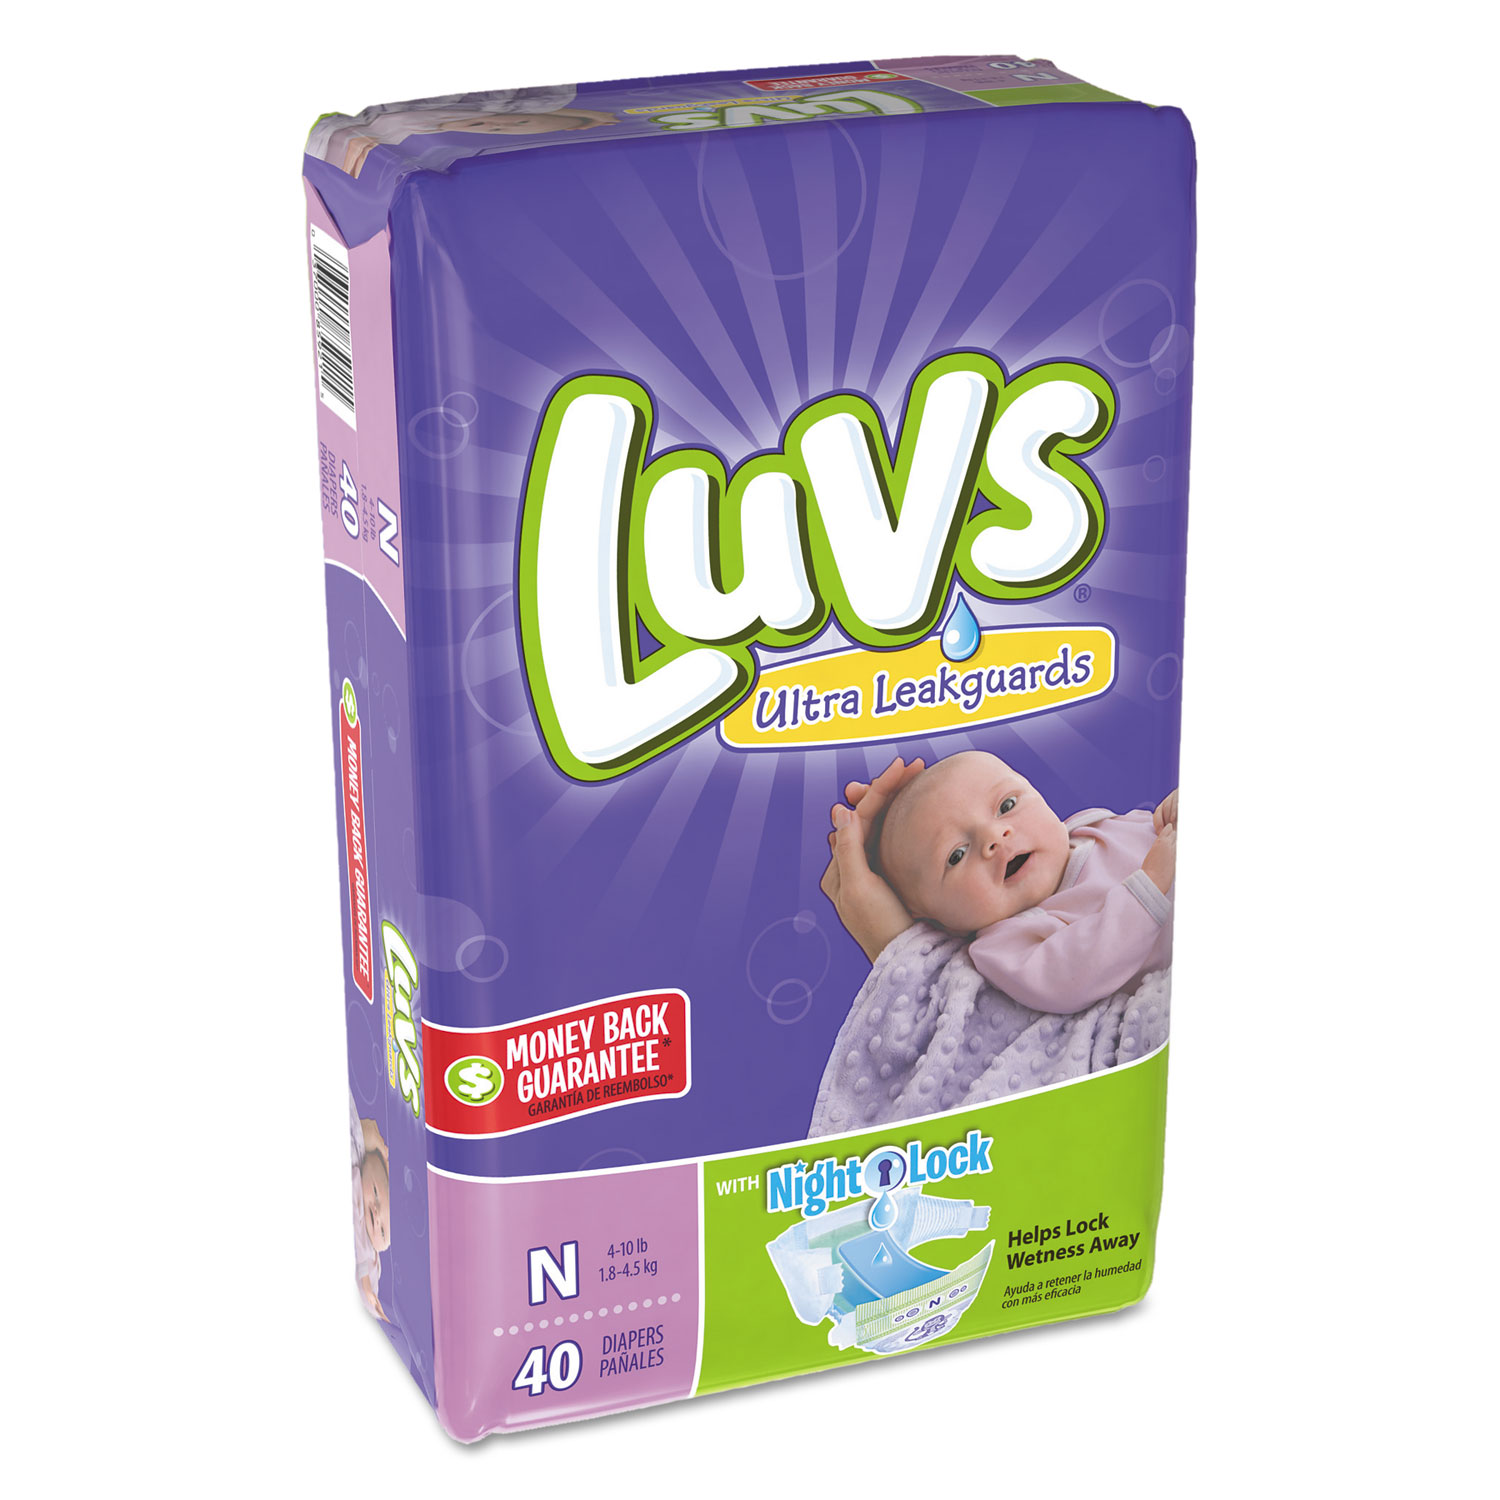 Diapers w/Leakguard, Newborn: 4 to 10 lbs, 40/Pack, 4 Pack/Carton